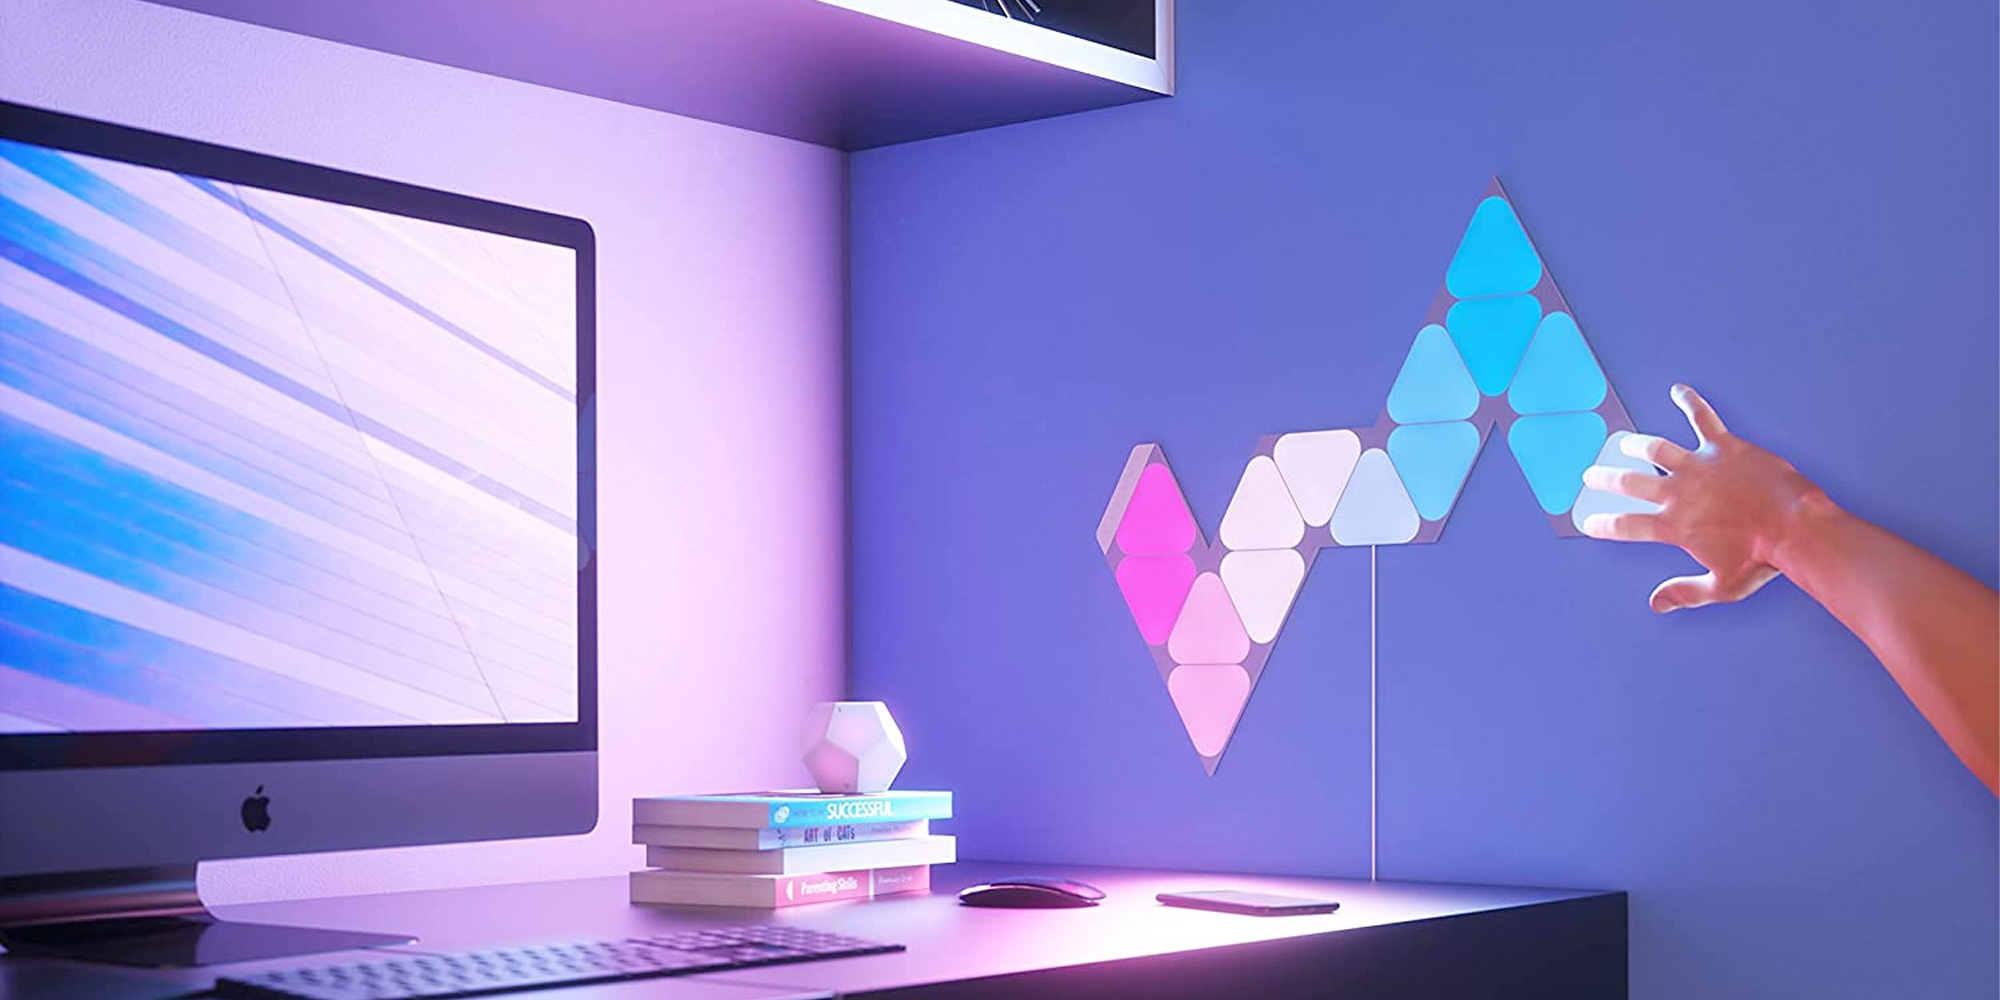 Save 50% on Nanoleaf's Shapes Mini Triangles starter kit 5-pack at new low of $60